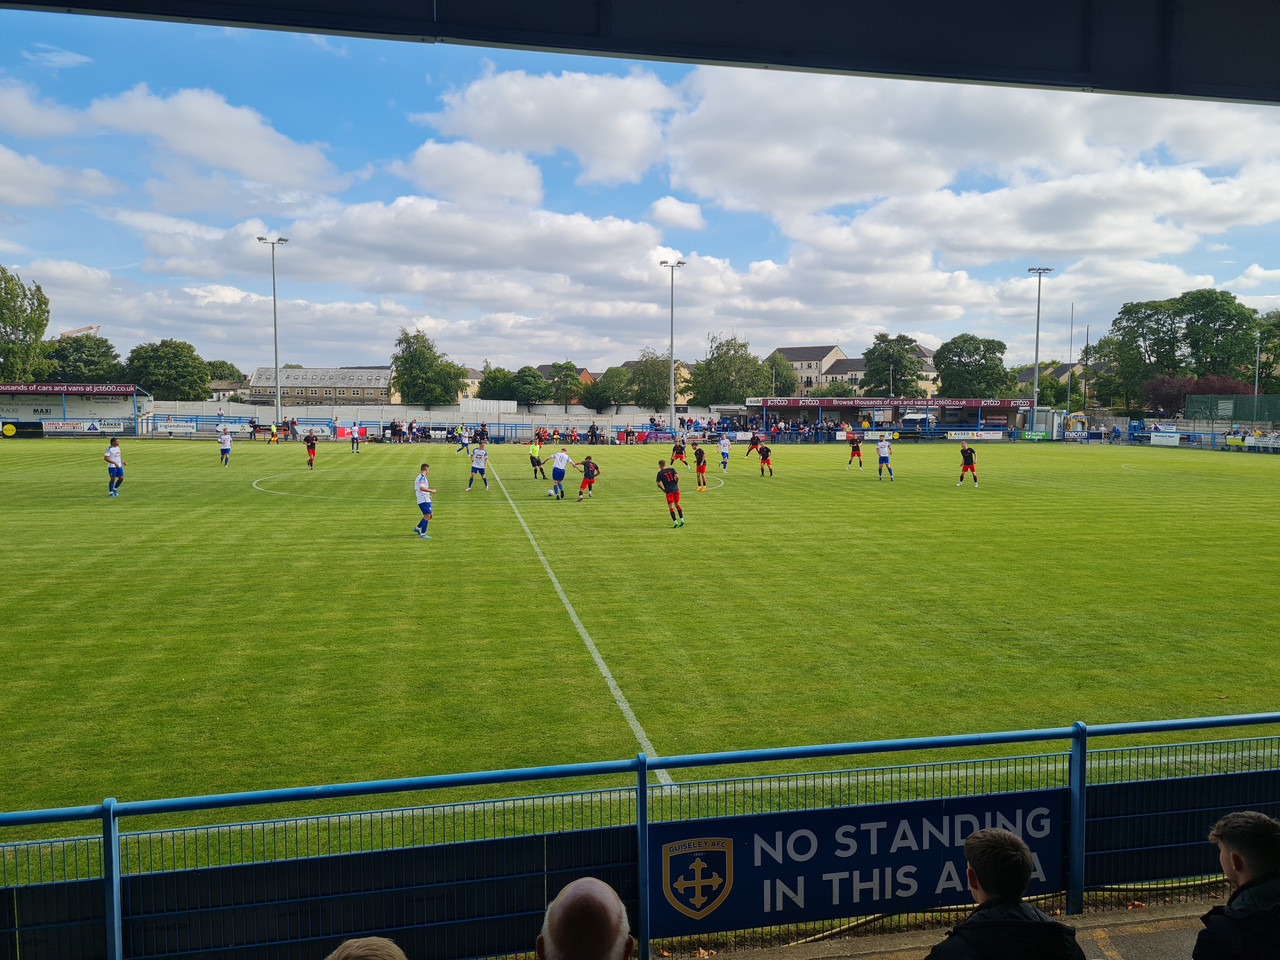 Guiseley AFC 1-0 Fleetwood Town U23: Cassidy goal helps Lions end pre-season in style